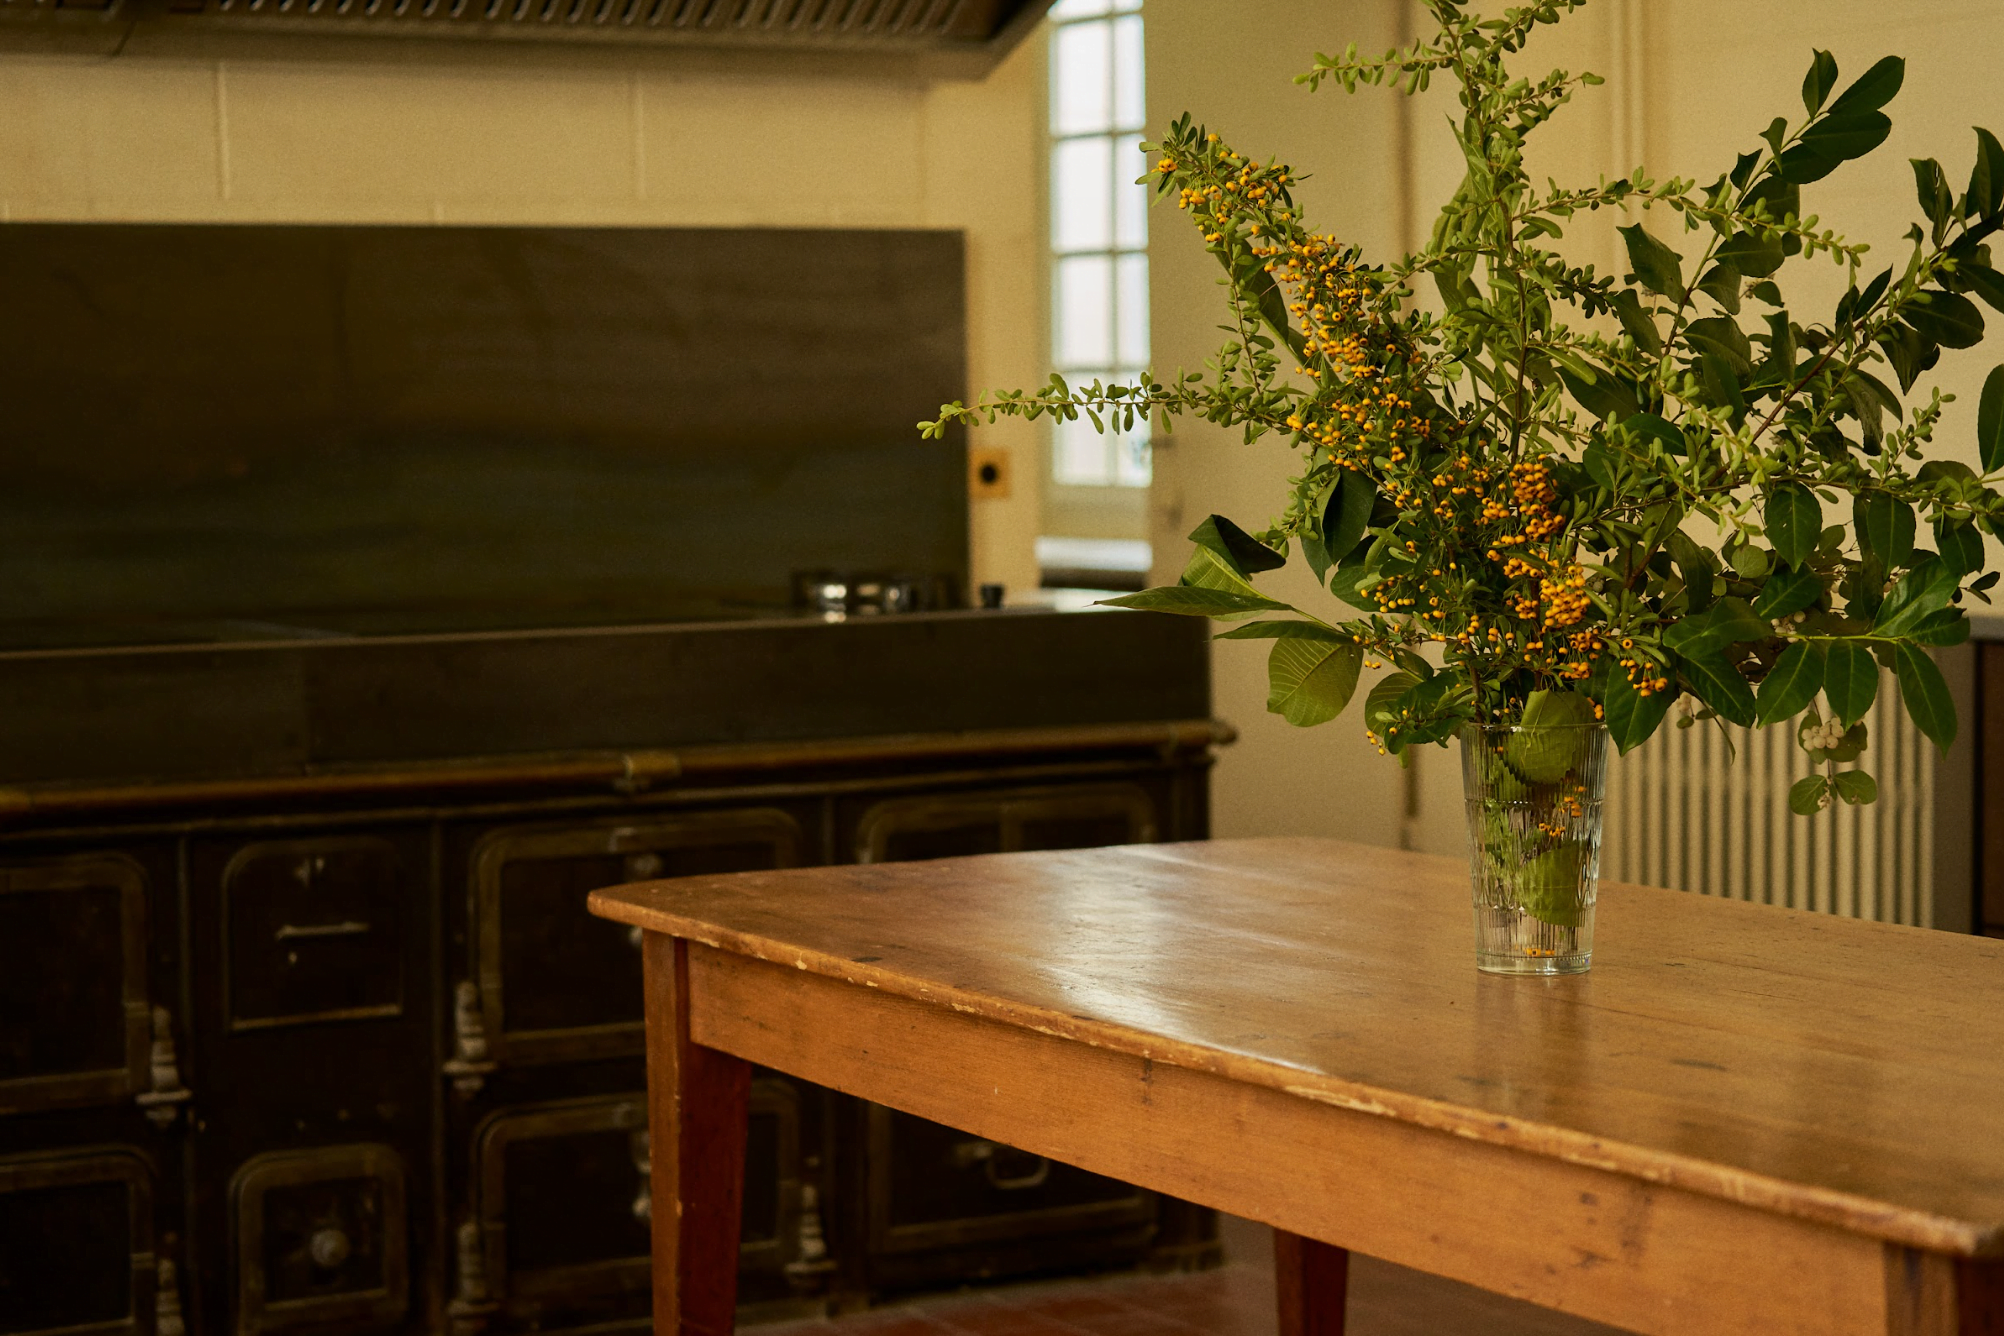 Wooden kitchen table with a bouquet of flowers, stove in the background